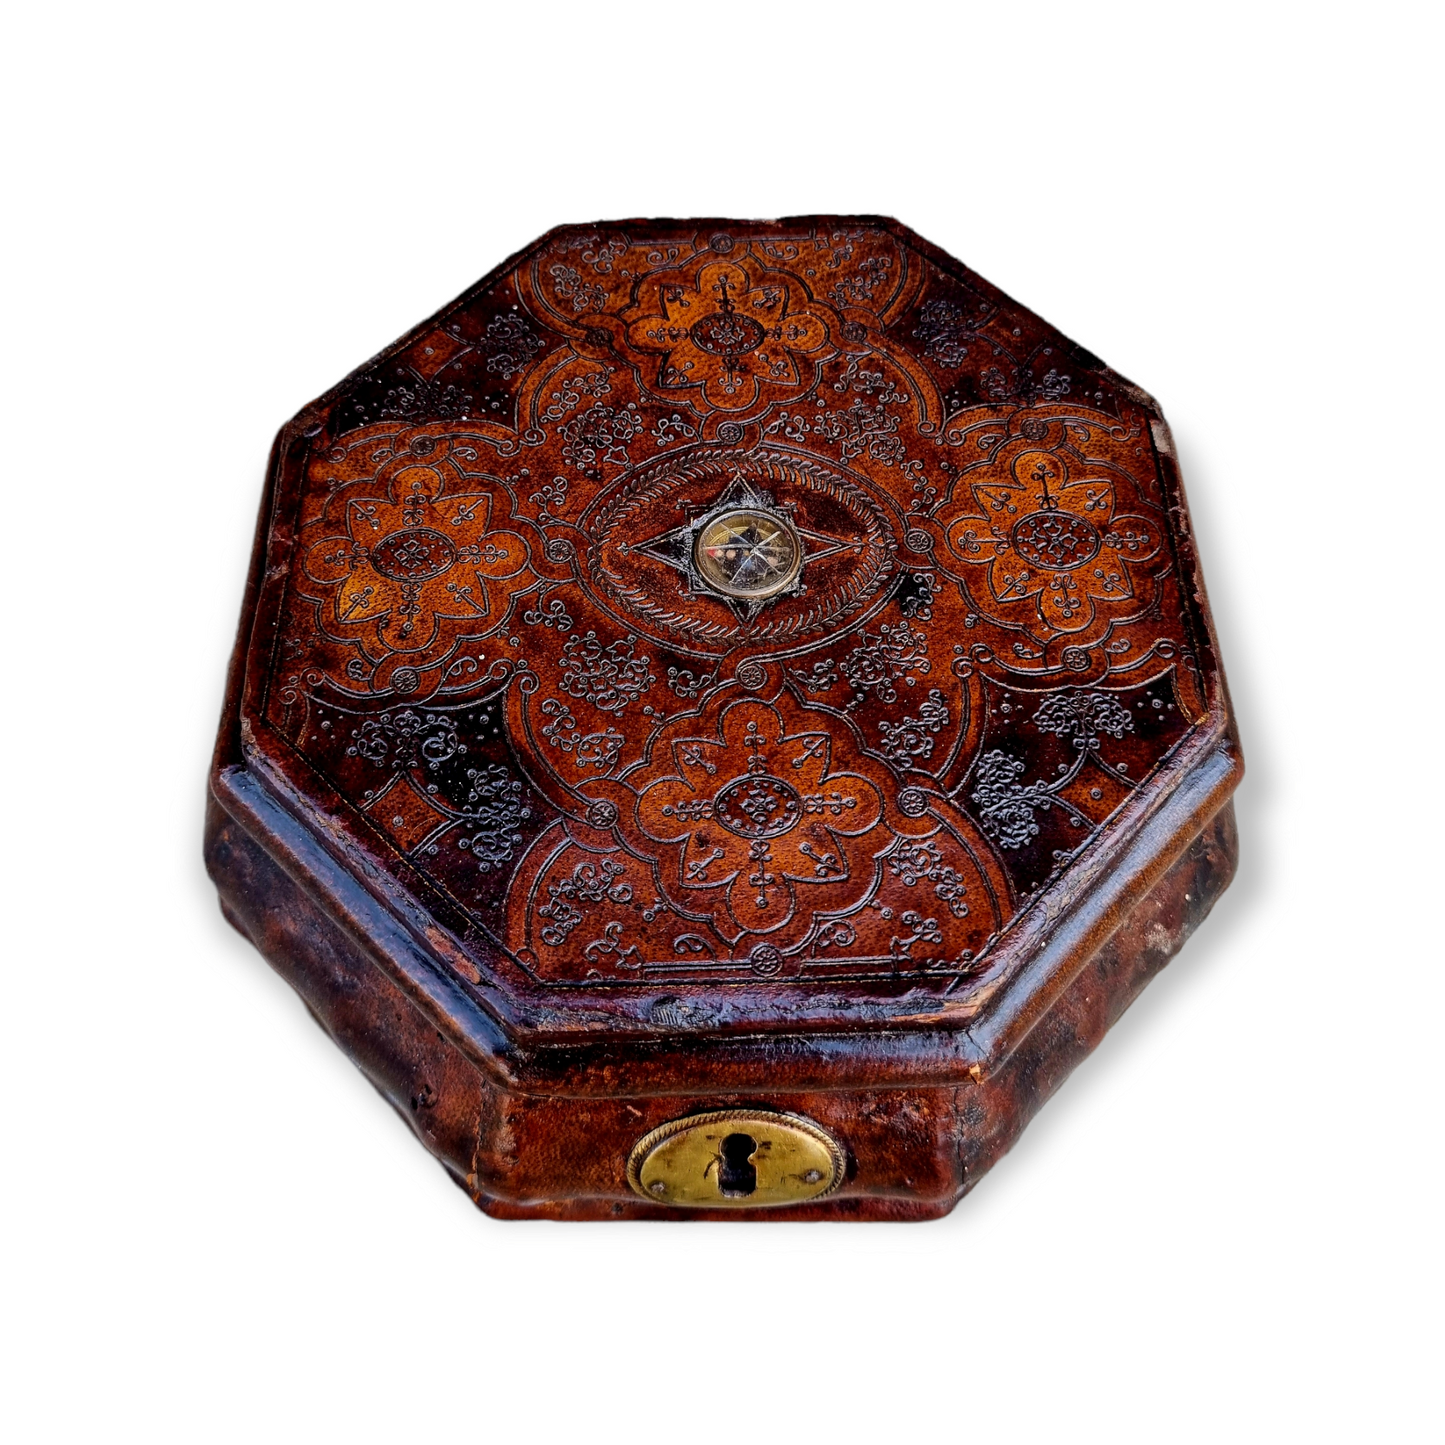 Mid 18th Century Antique Tooled Leather Box / Travelling Case With A Rare Inlaid Compass to the Lid